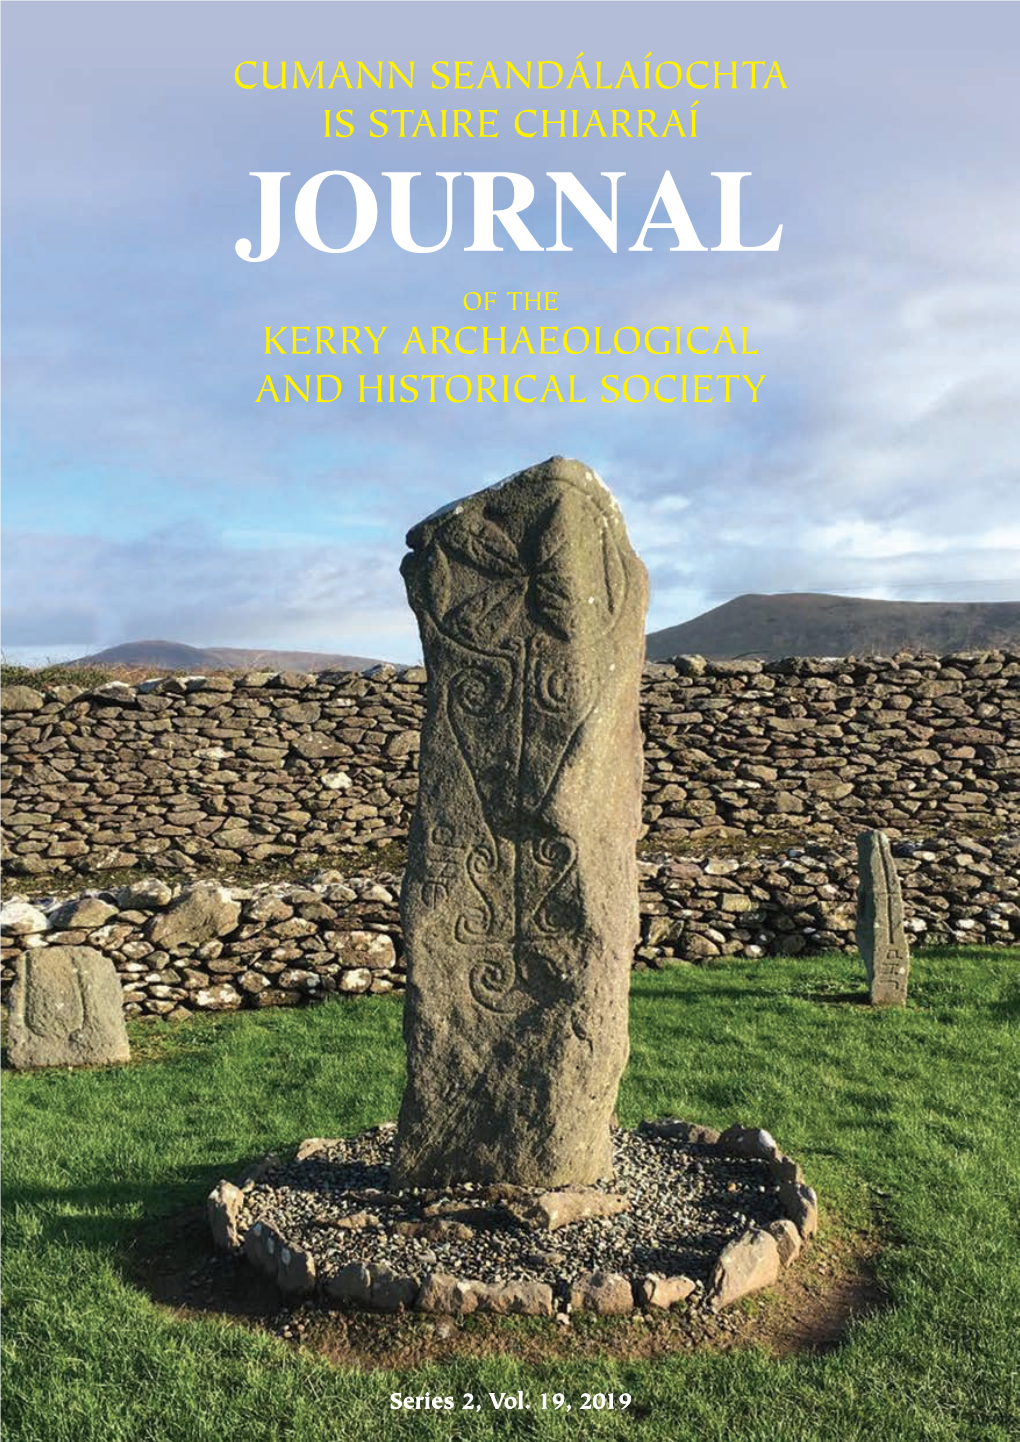 Journalkerry Archaeological and Historical Society